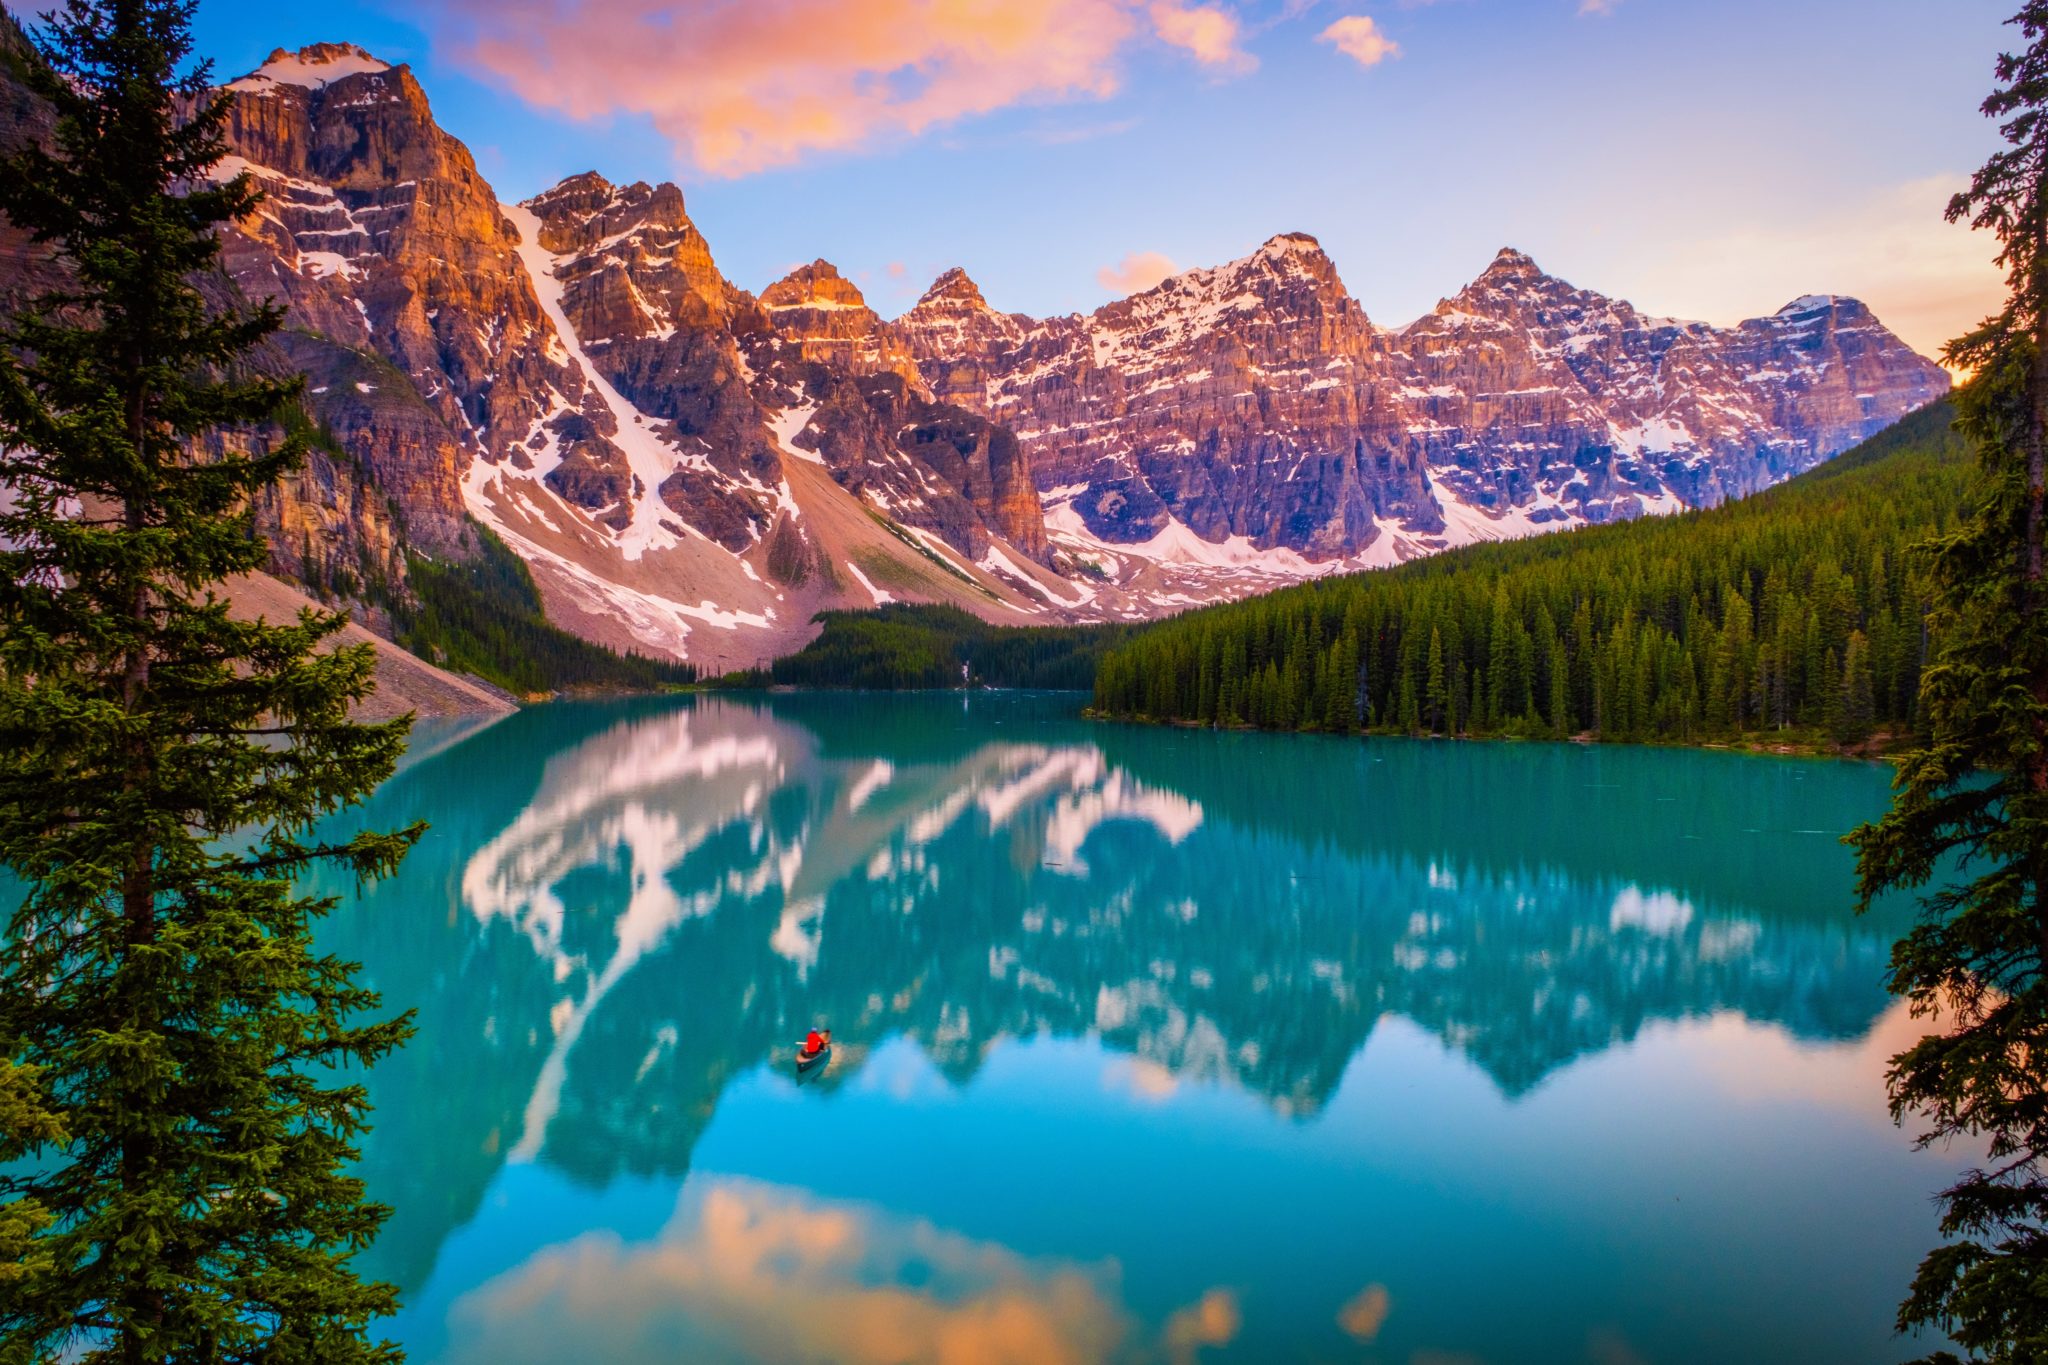 Moraine Lake Weather When is the BEST Time to Visit?